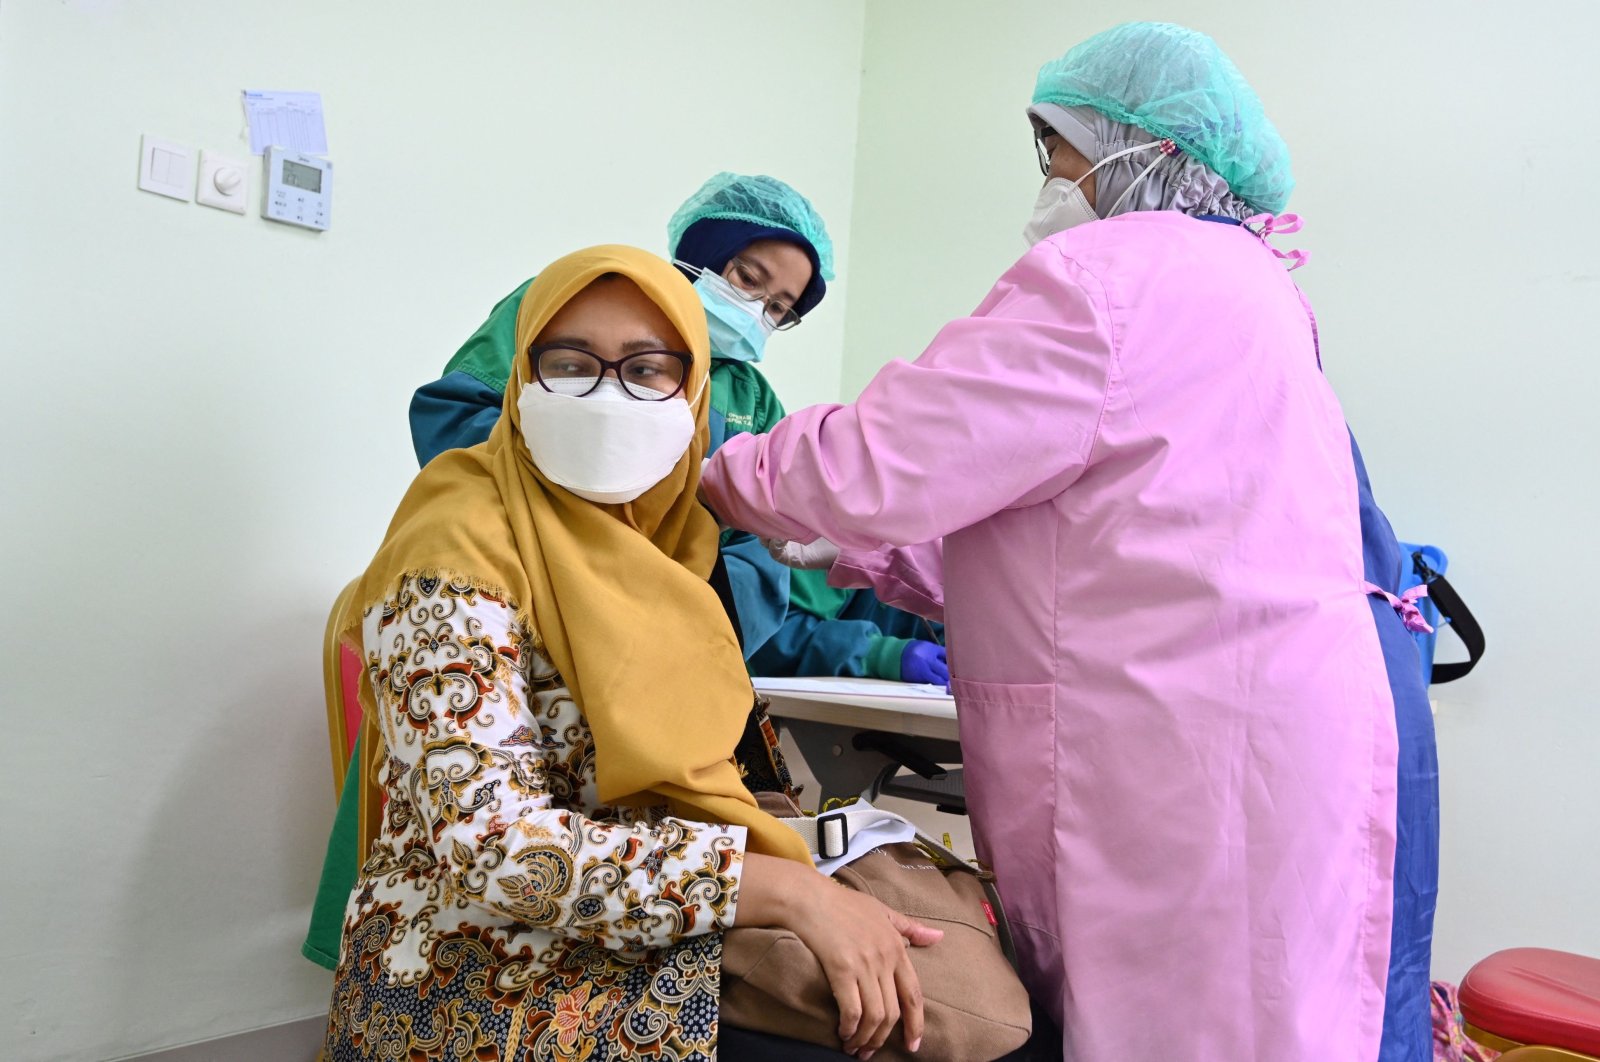 A woman receives a COVID-19 vaccine at the Depok regional hospital in Depok, West Java on March 18, 2021. (AFP Photo)